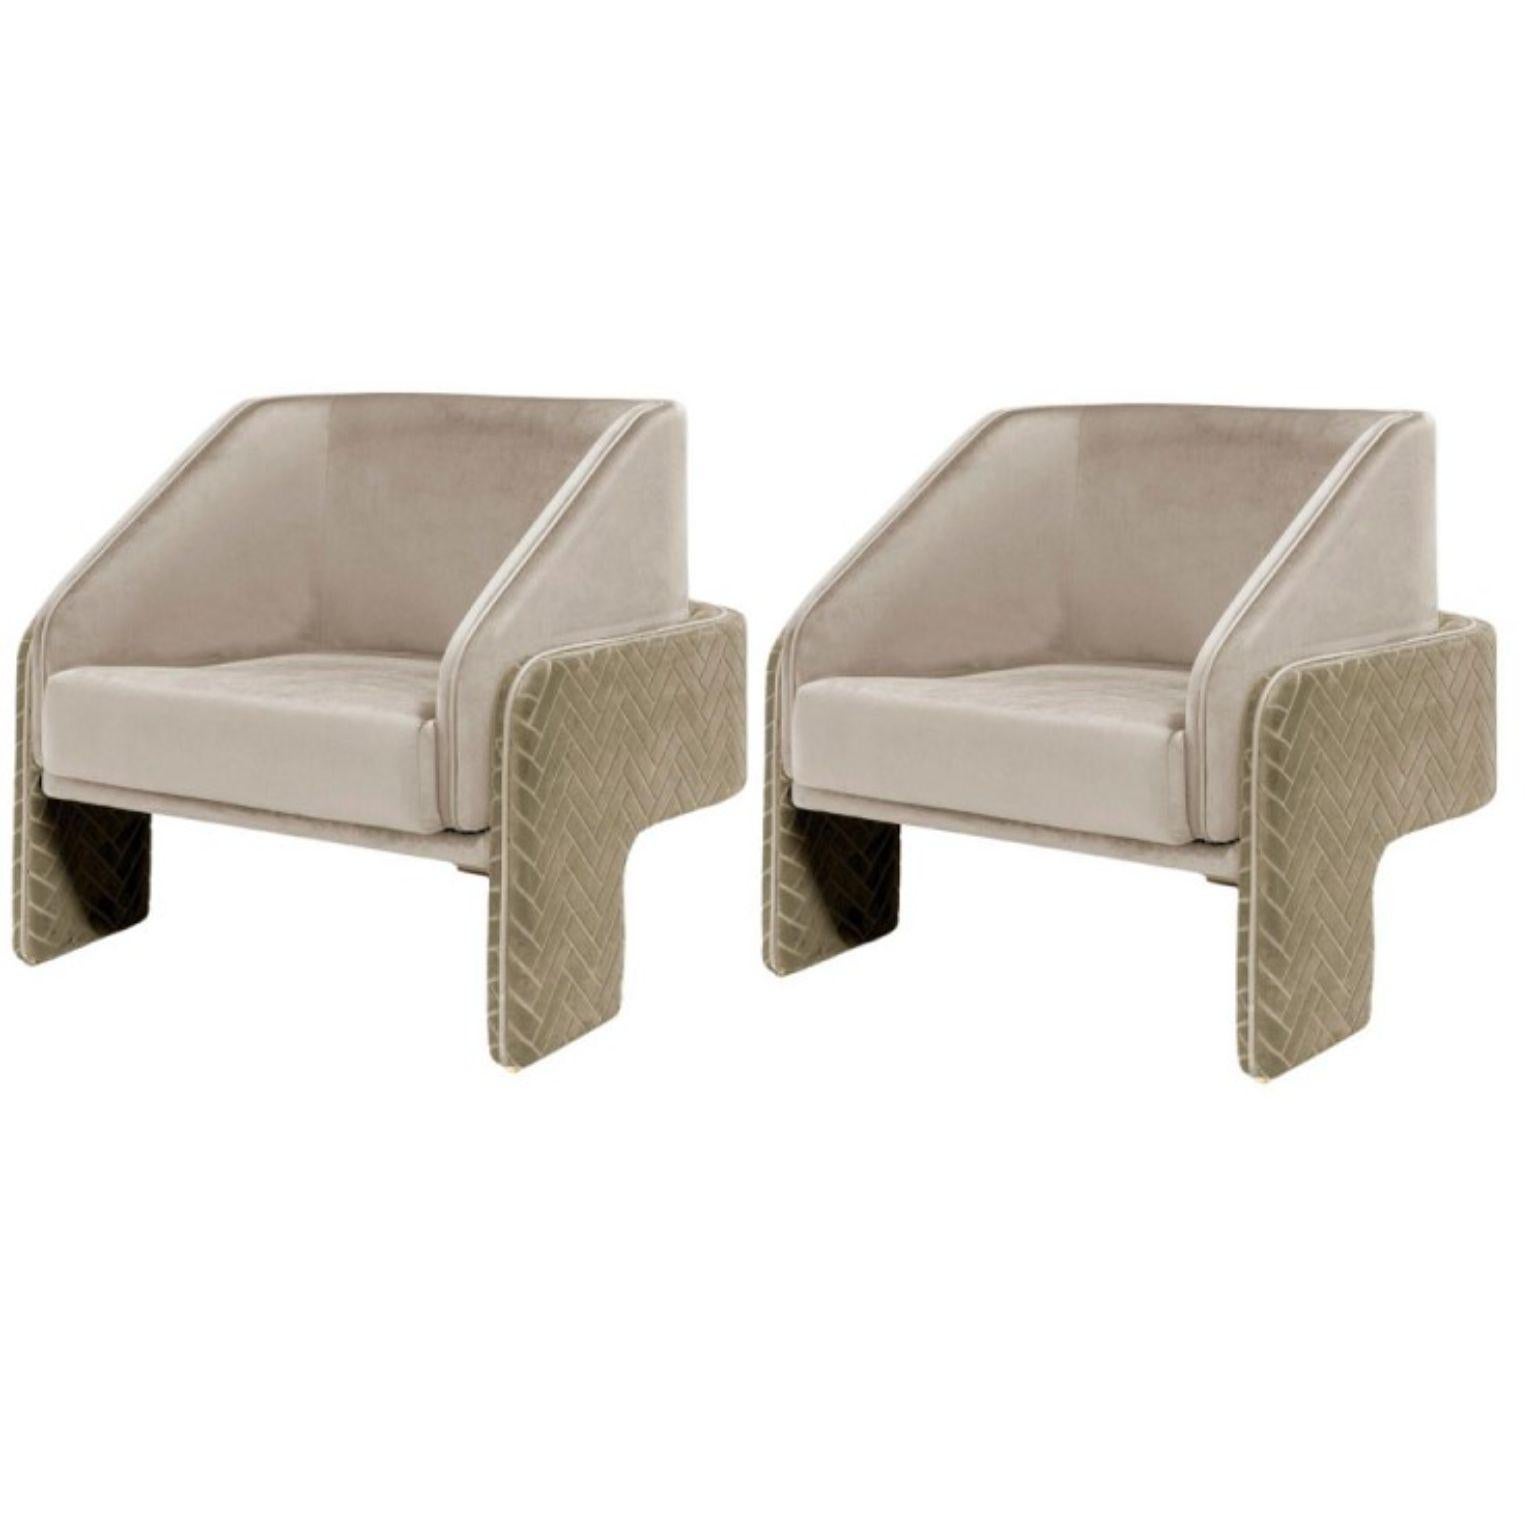 Set of 2 L’Unité armchairs by Dooq
W 85 cm 33”
D 81 cm 31”
H 74 cm 29”
seat height 41 cm 16”

Materials: upholstery fabric or leather
feet stainless steel plated polished or satin:
brass, copper or nickel
COM/COL requirements: 
outside